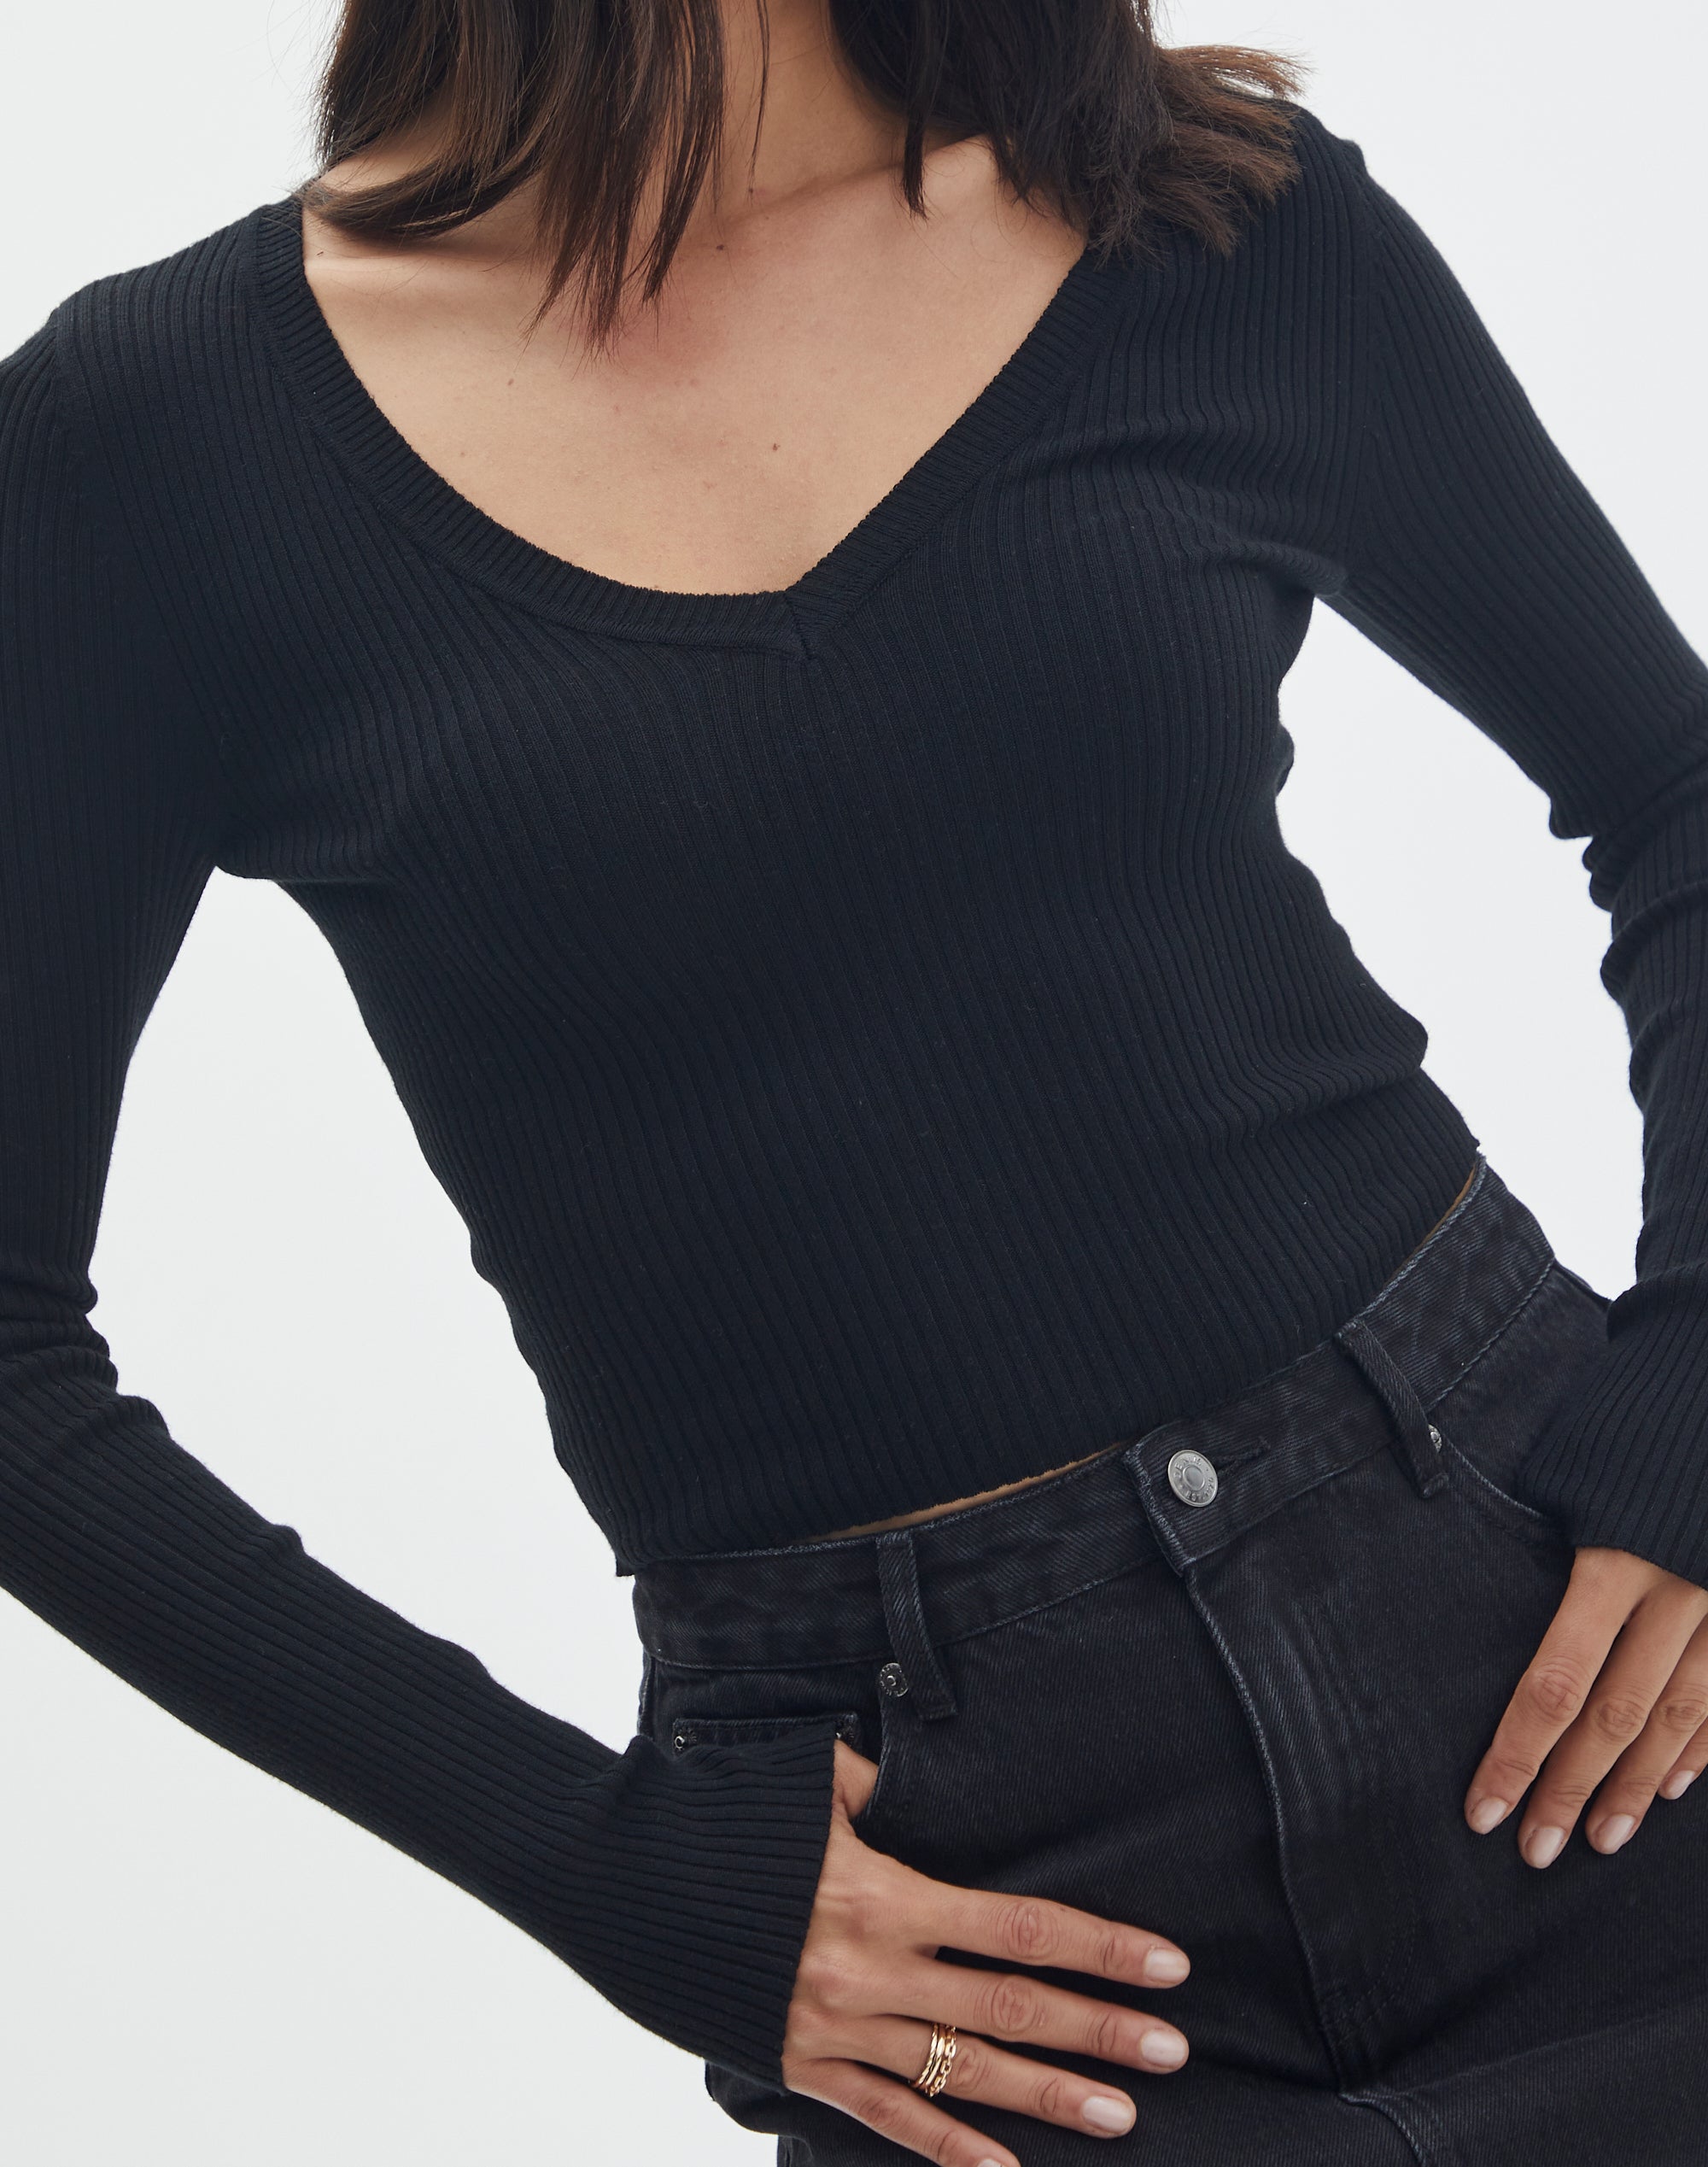 Long Sleeve Ribbed Knit Top in Its Soy Cute